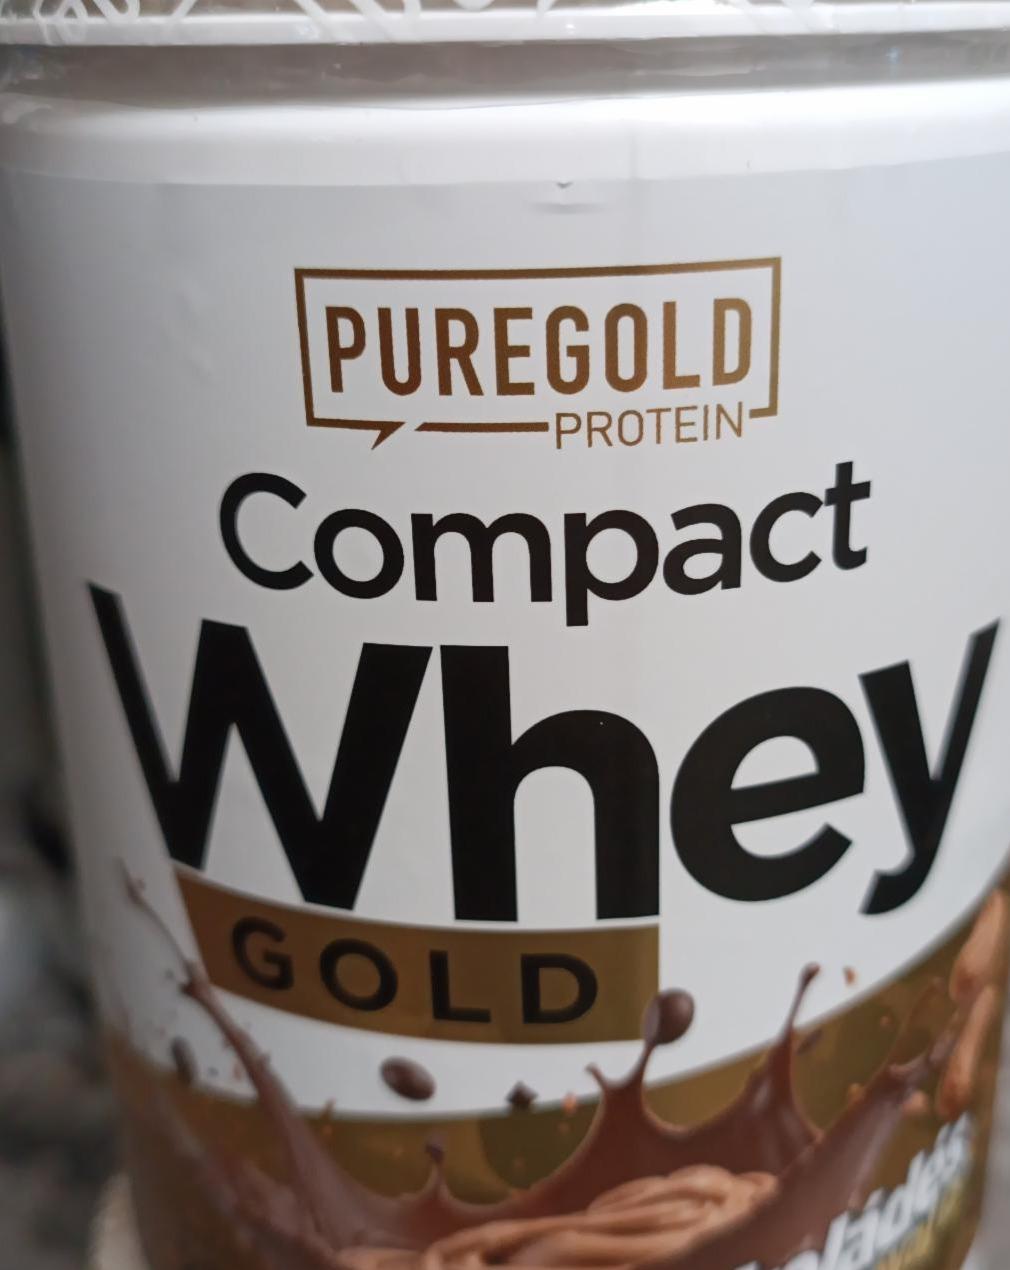 Képek - Compact whey gold Puregold protein